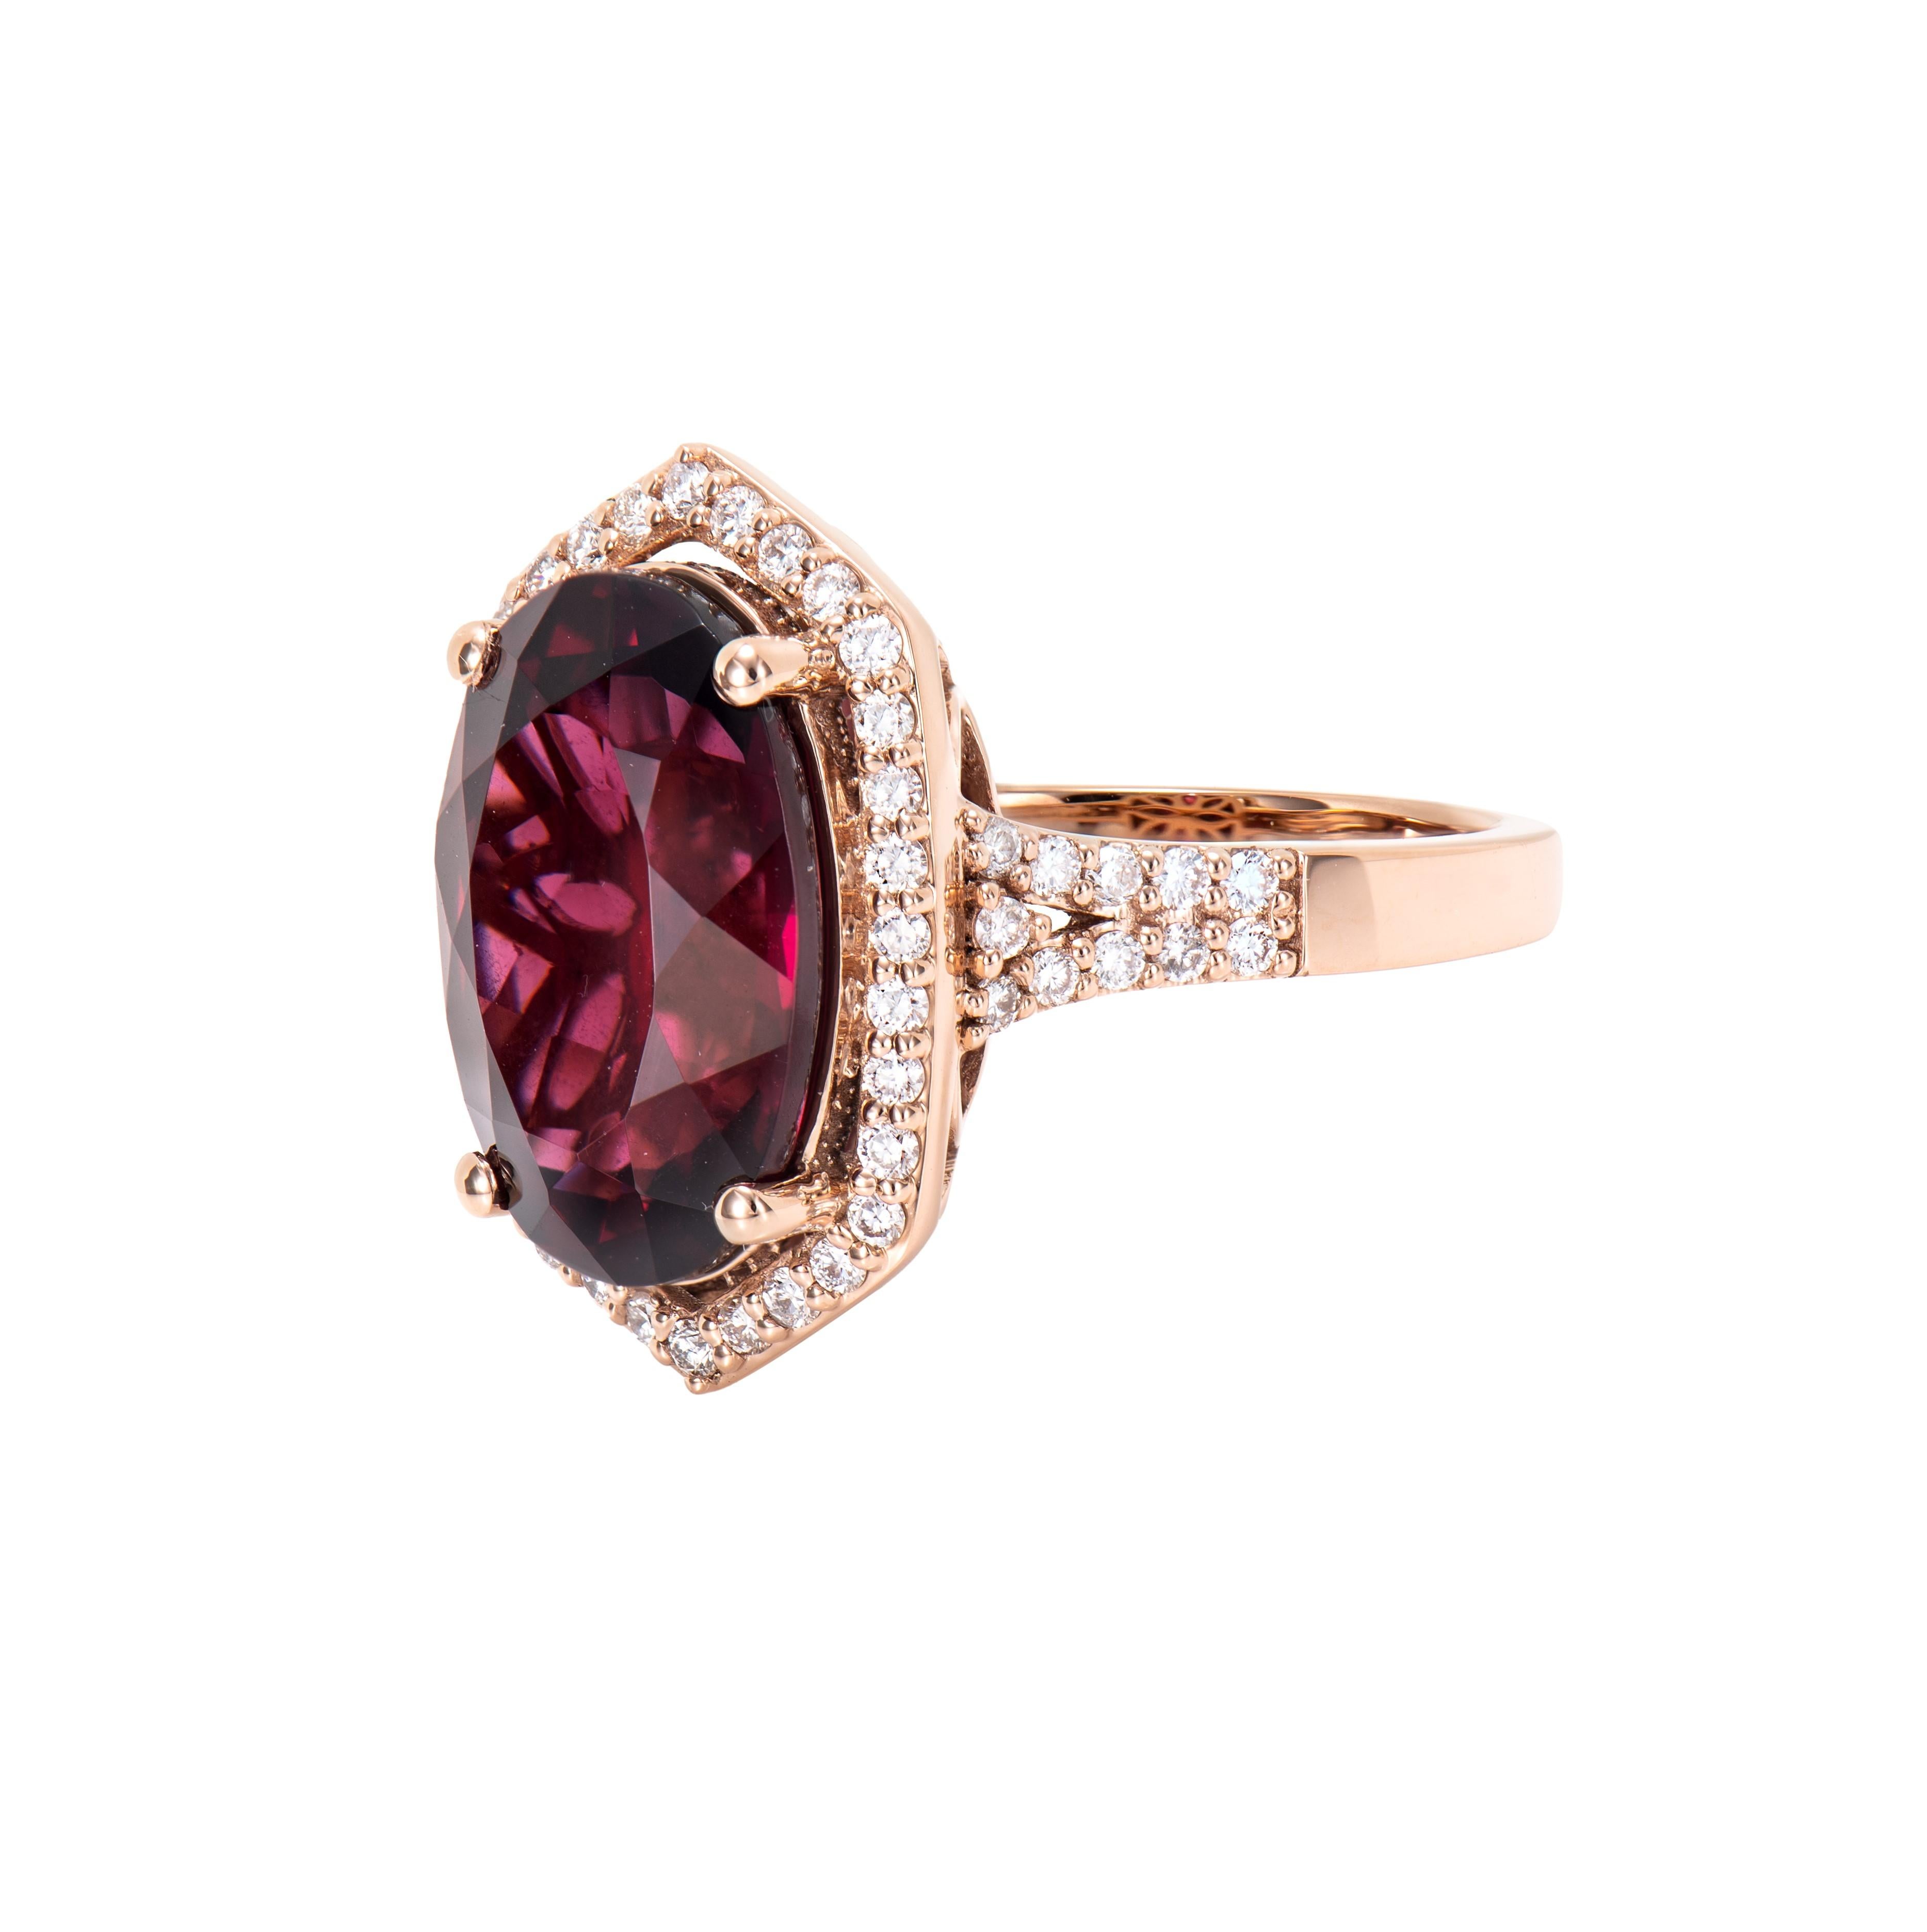 Oval Cut 8.81 Carat Rhodolite Cocktail Ring in 18 Karat Rose Gold with White Diamond. For Sale